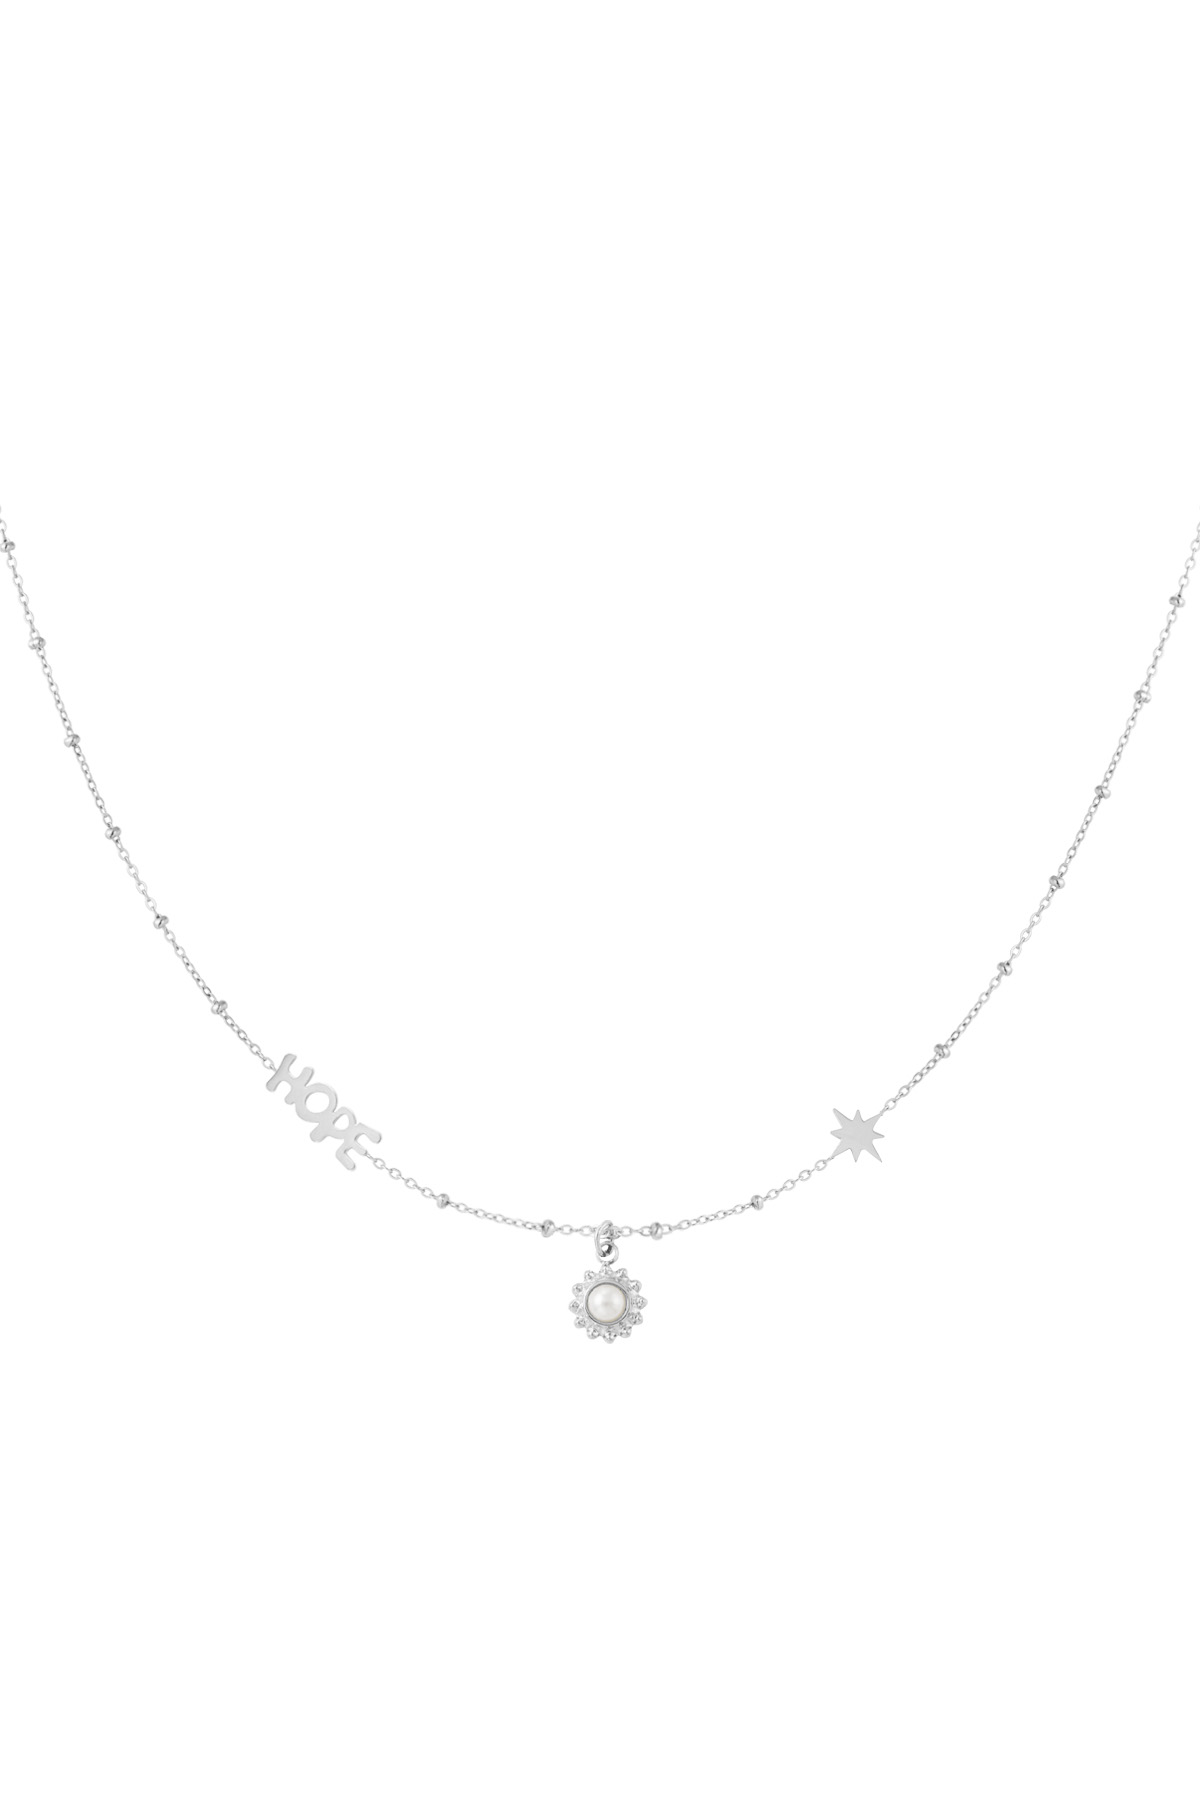 Ball chain with hope and pendants - silver h5 